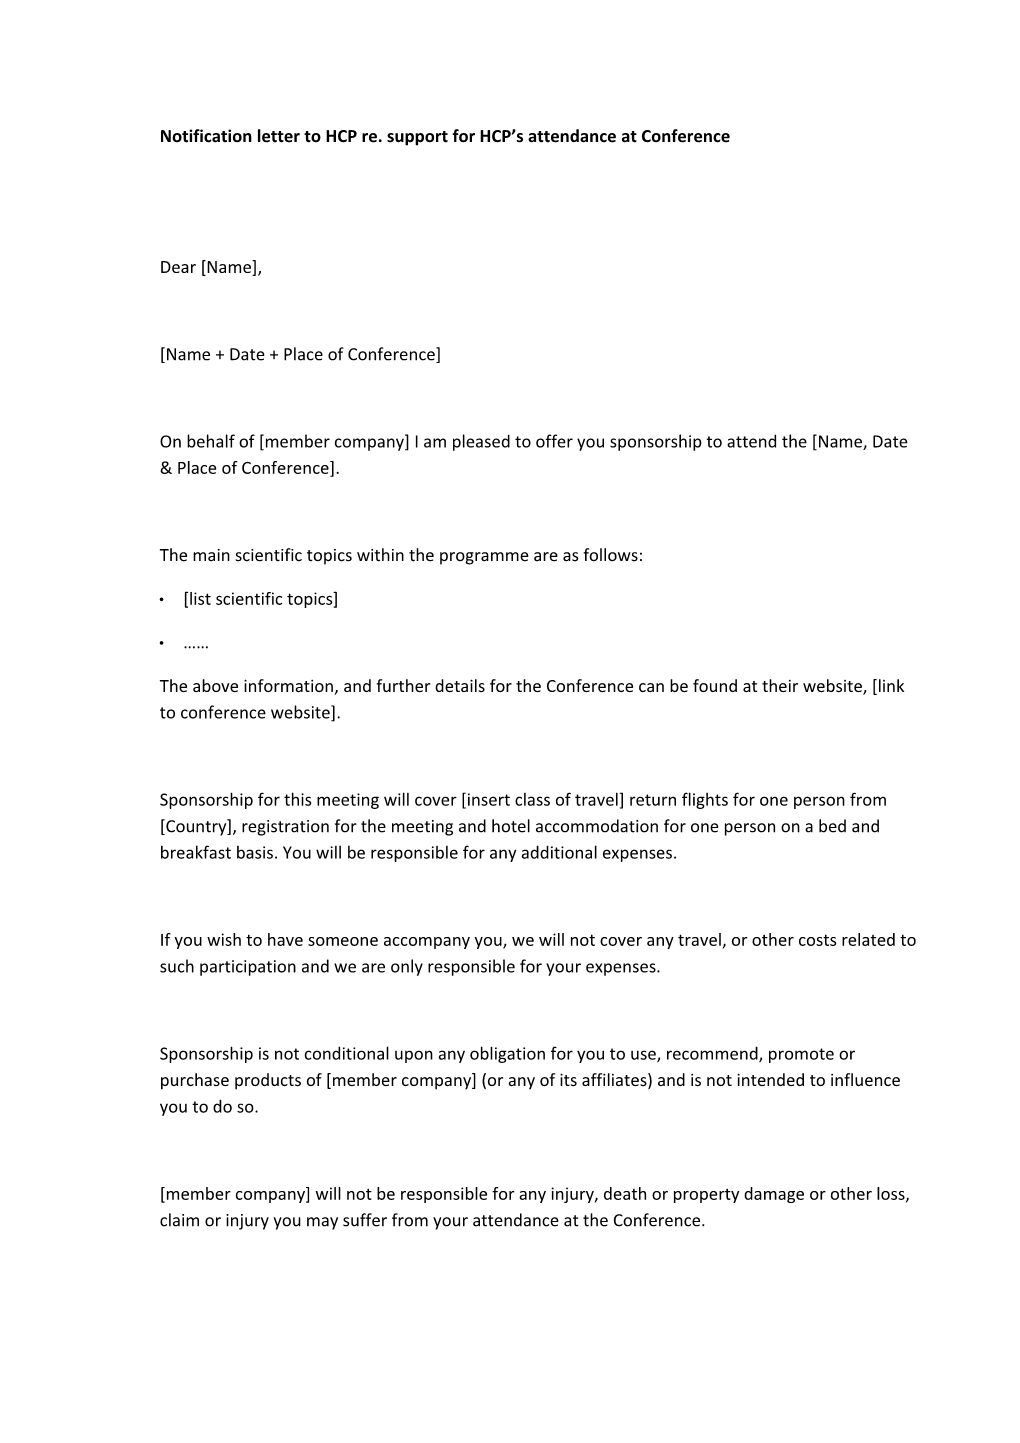 Notification Letter to HCP Re. Support for HCP S Attendance at Conference